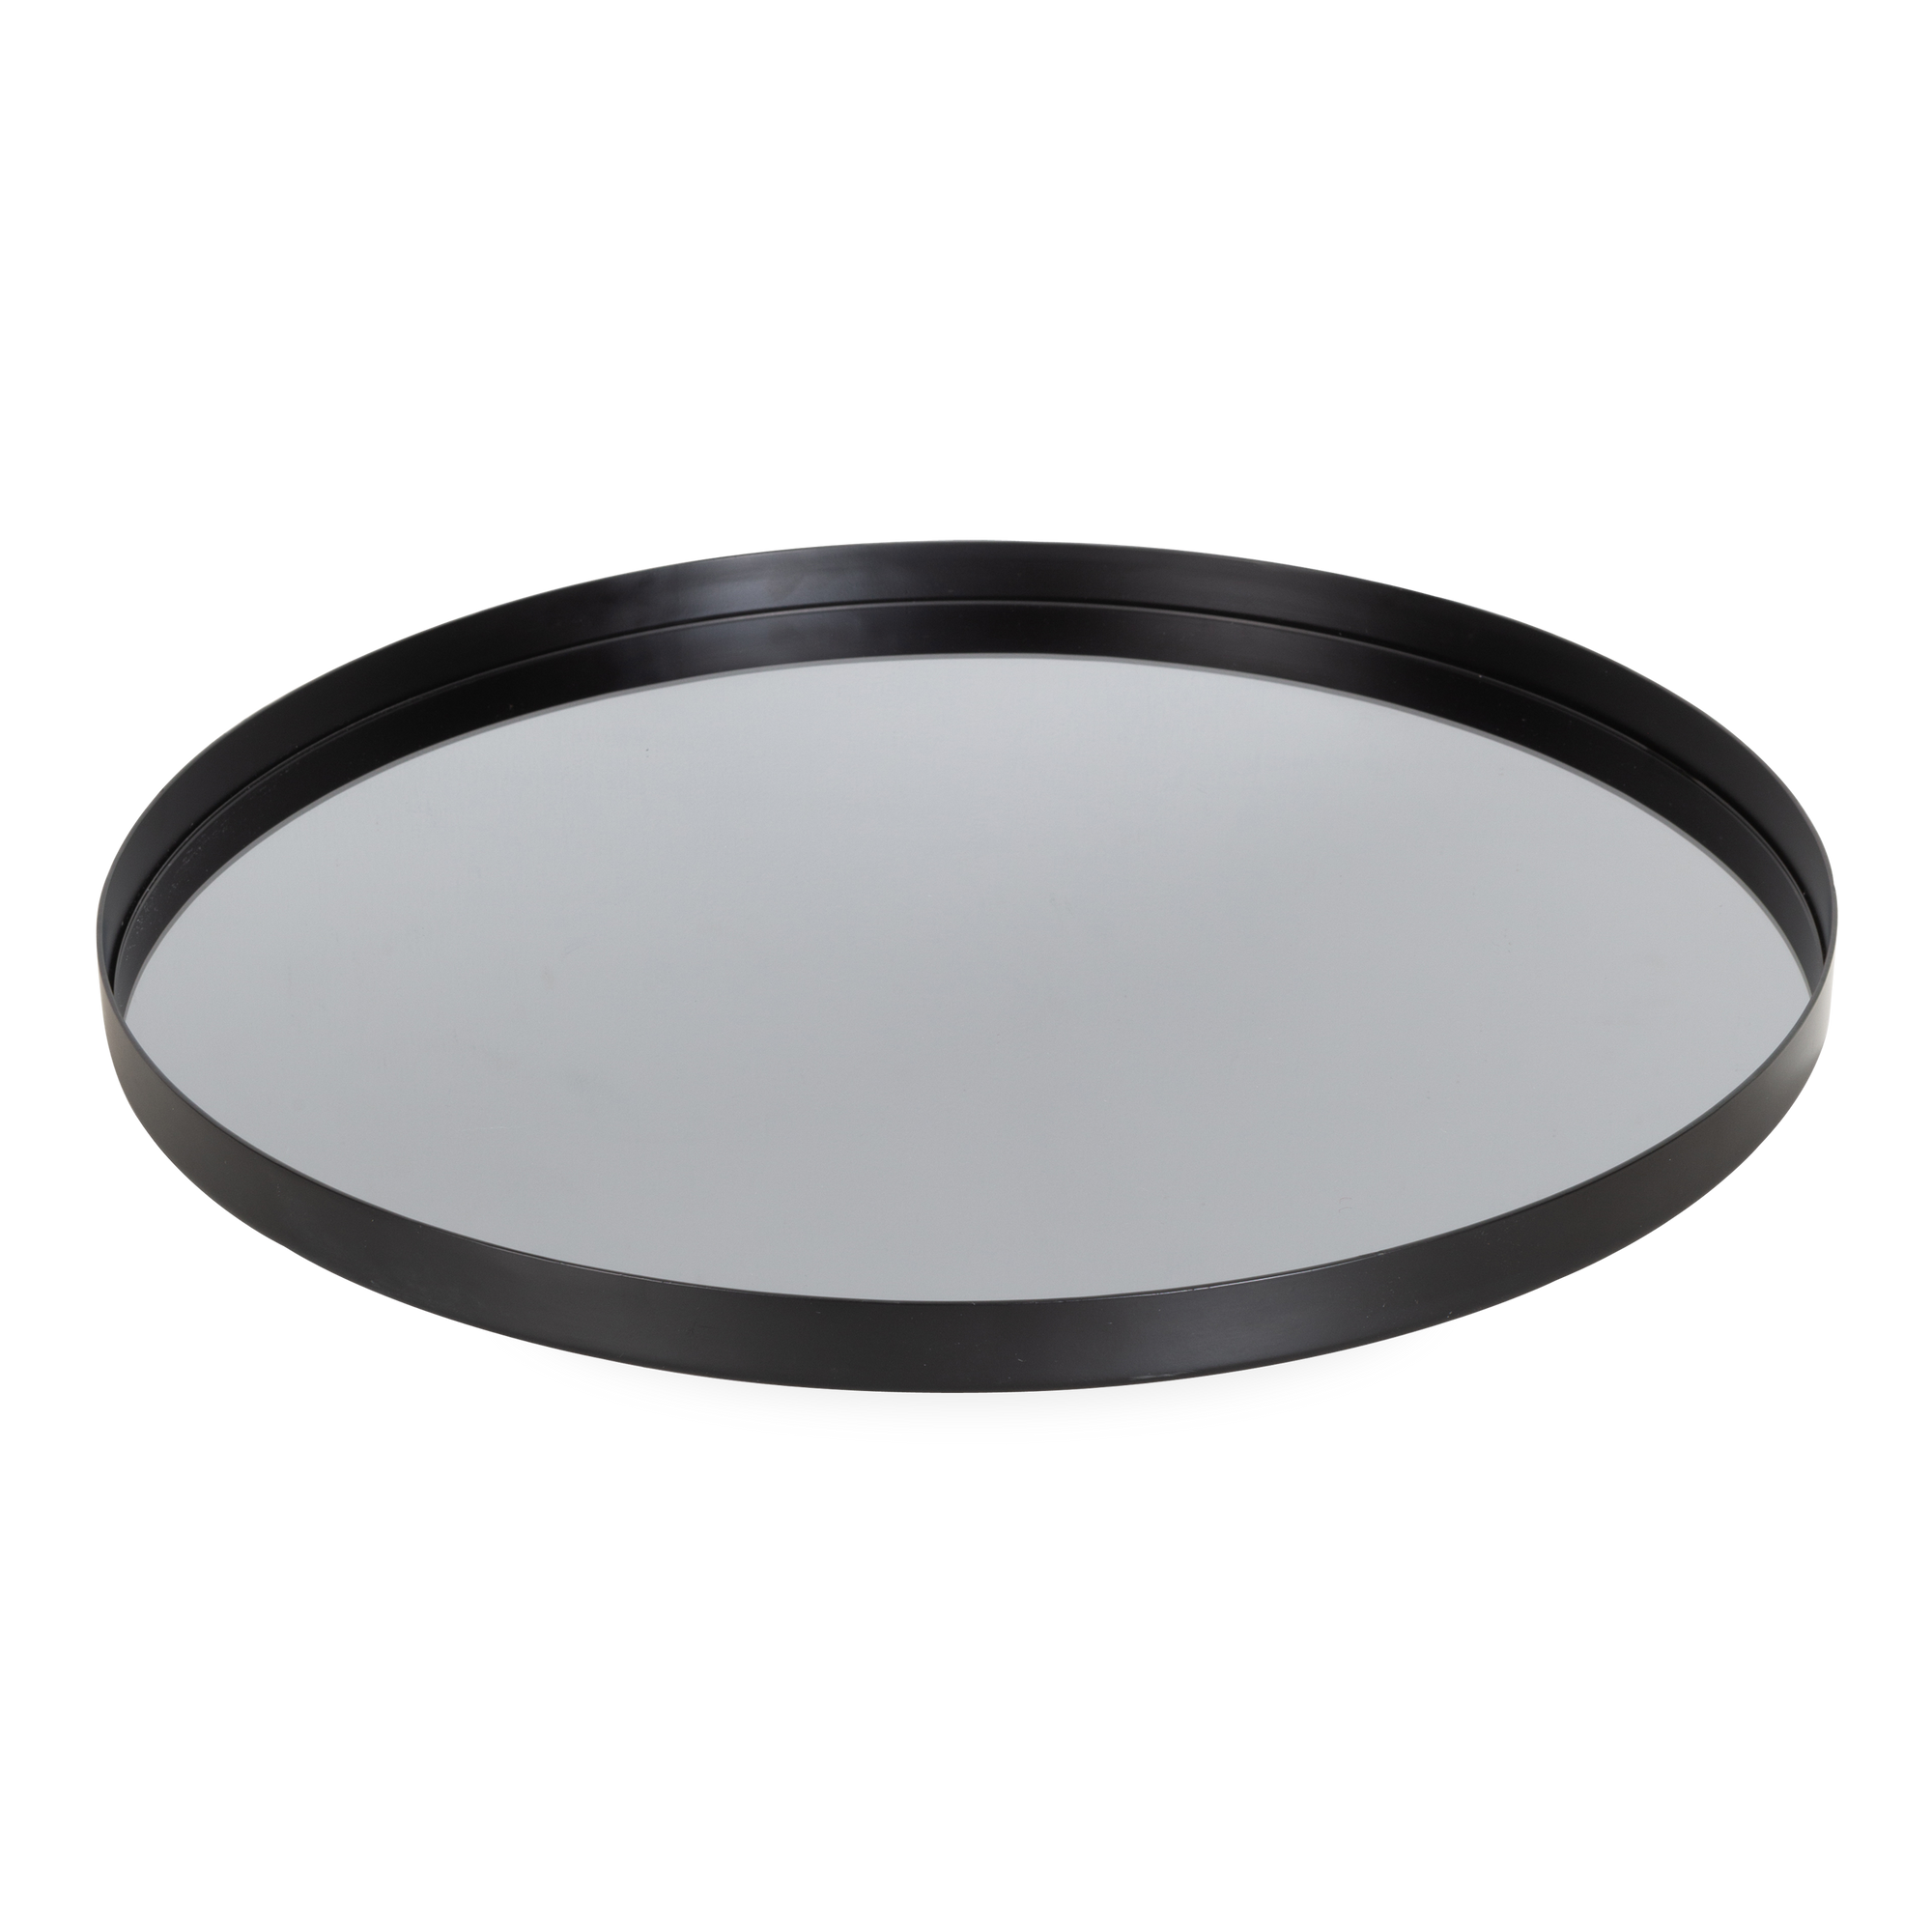 Characterized by its confident presence and its luxurious build quality, the Reflect Round Tray is defined by its clean, sharp lines and its elevation of simple forms.